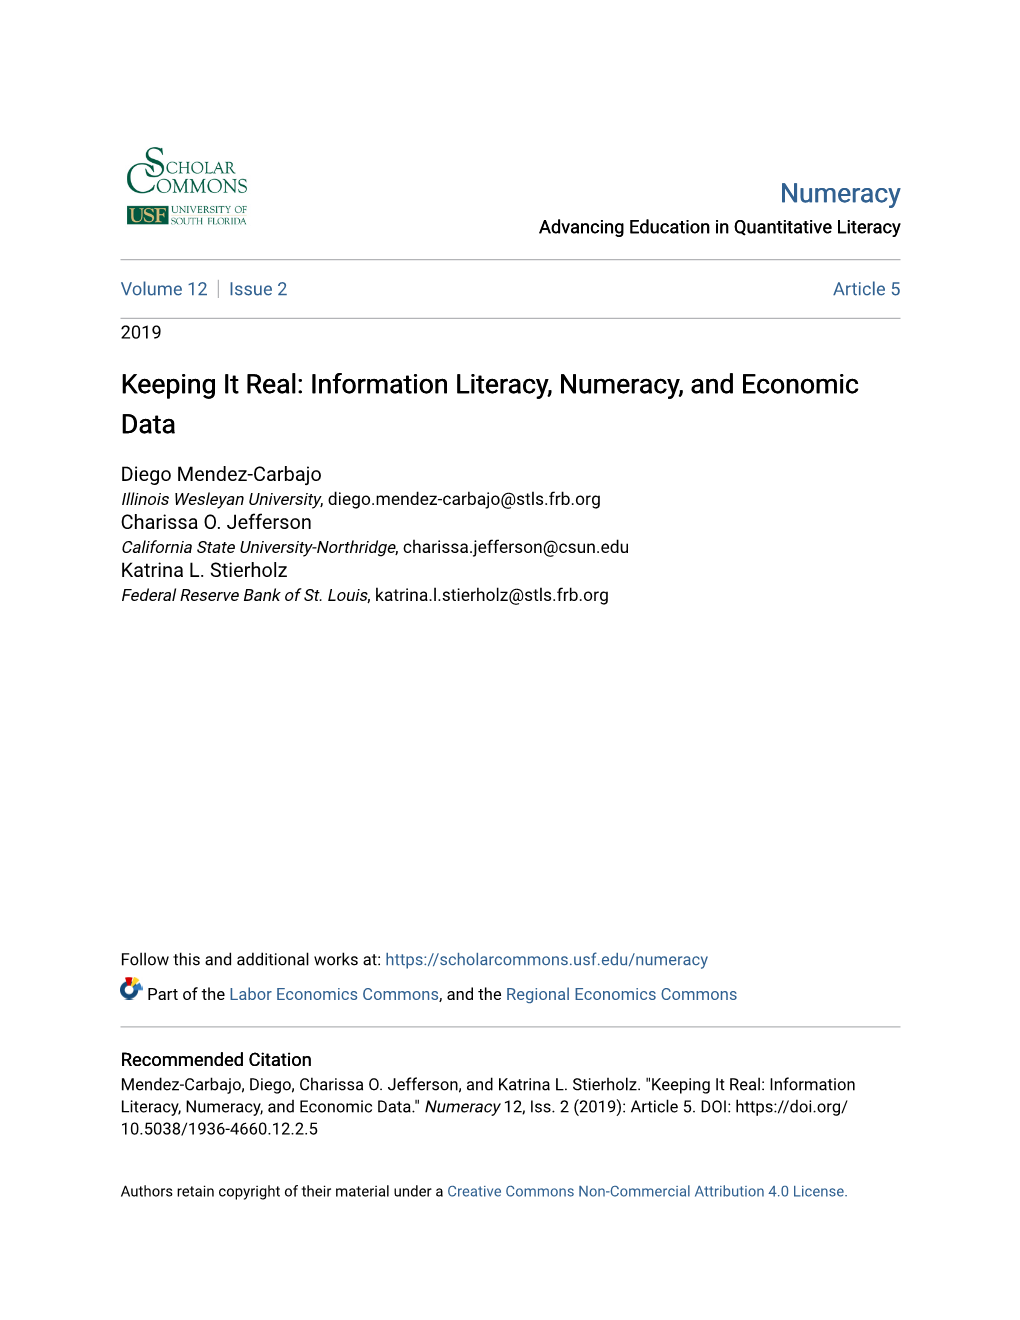 Keeping It Real: Information Literacy, Numeracy, and Economic Data